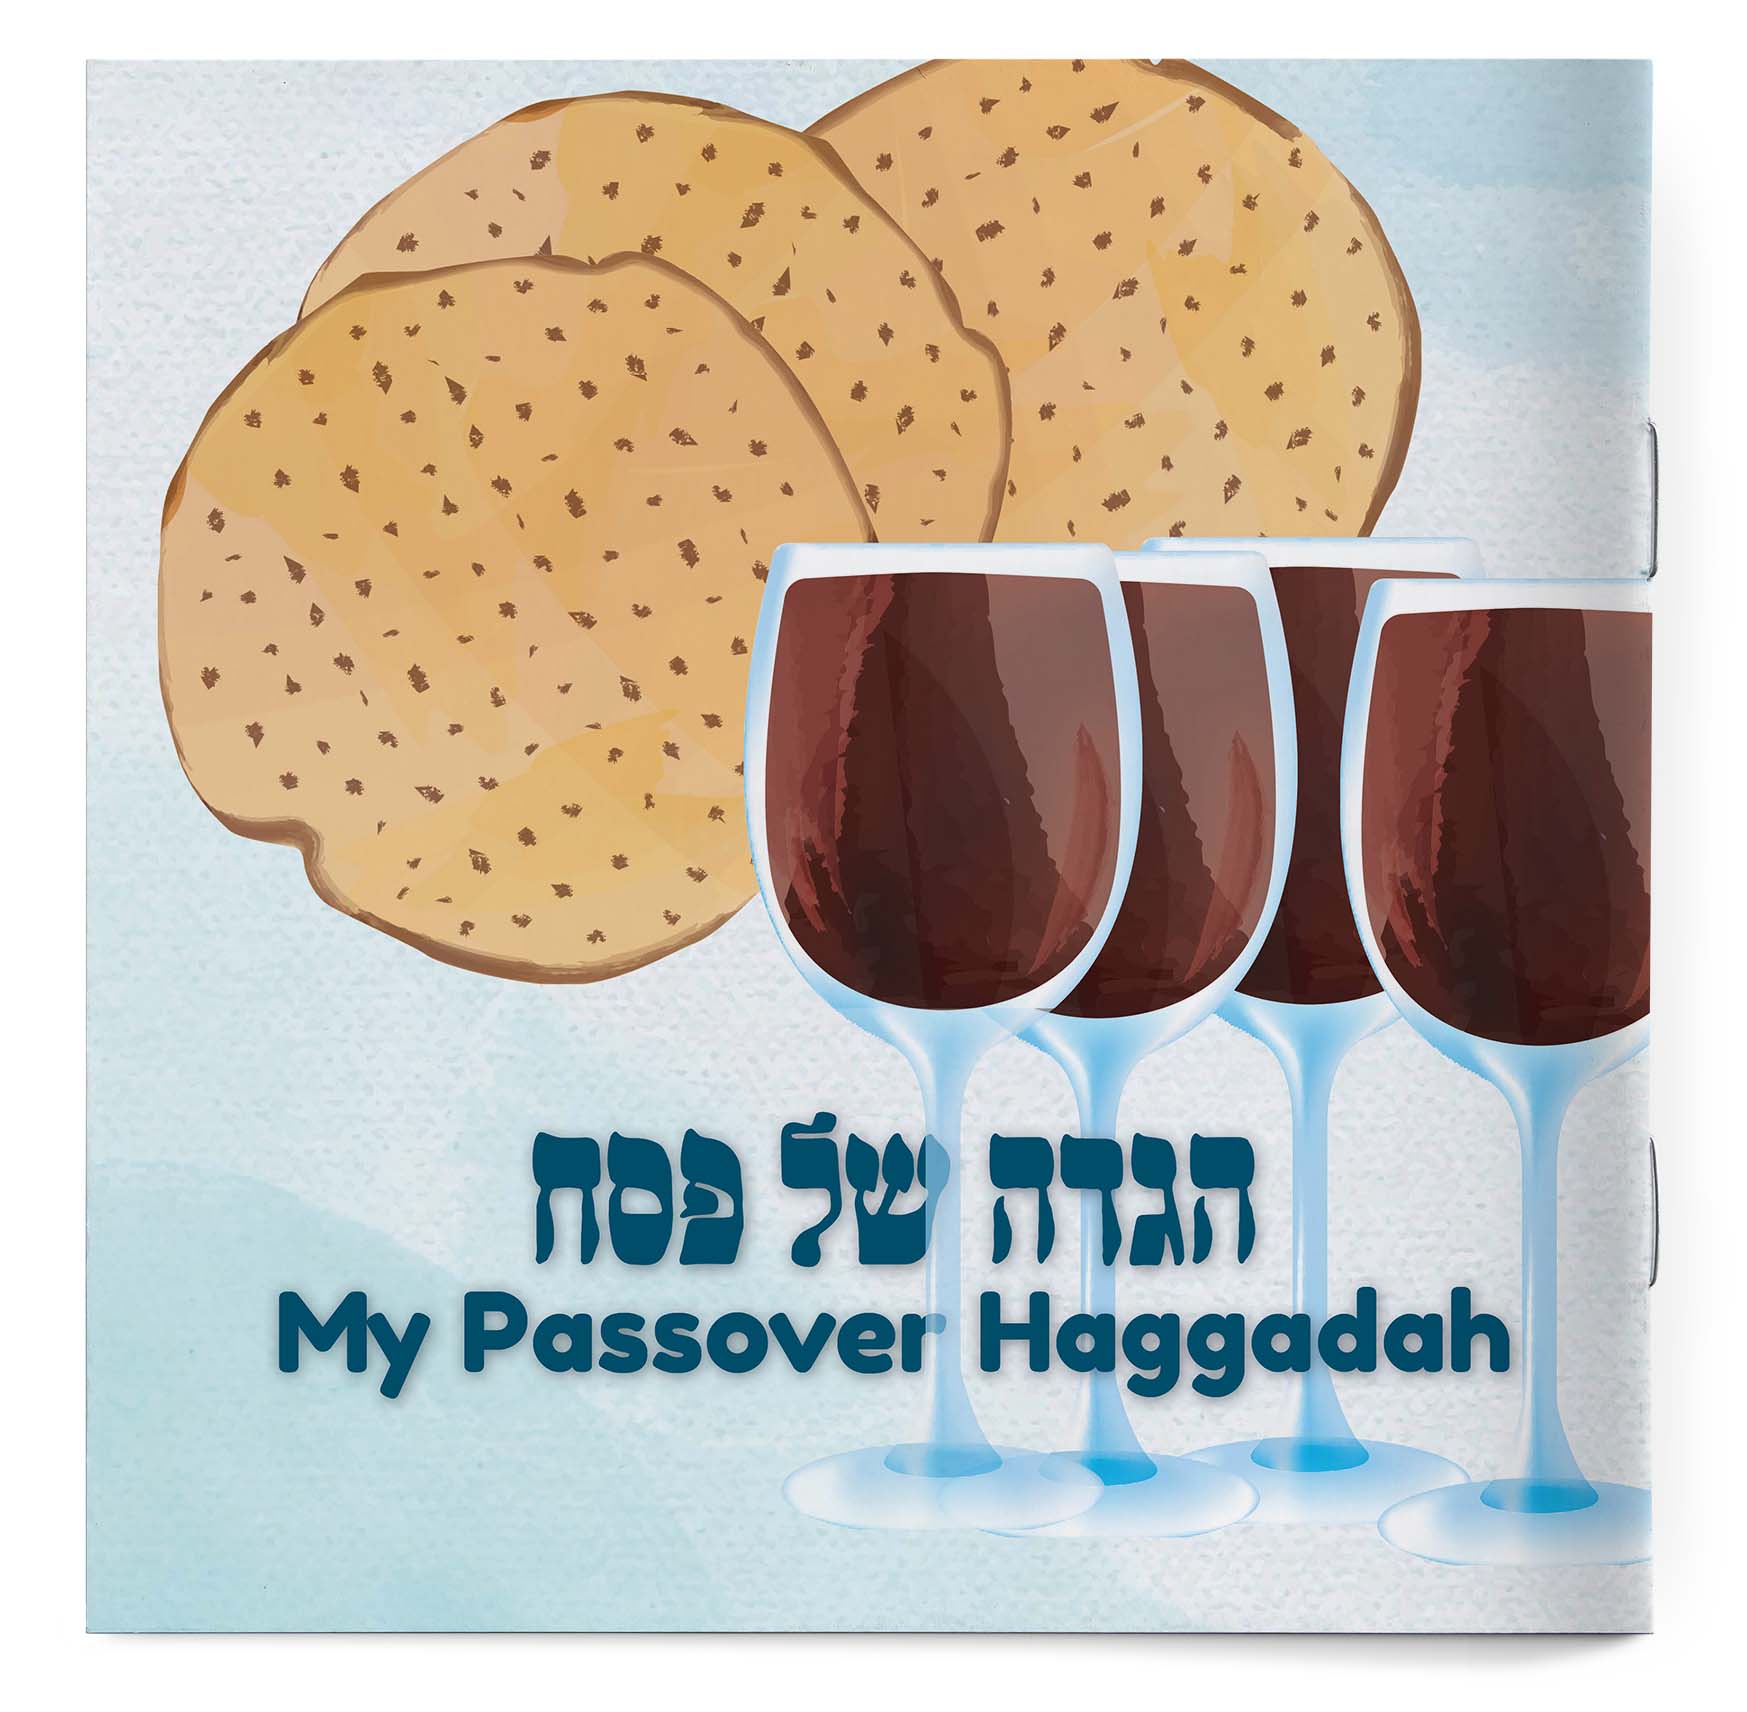 The Haggadah Pamphlet